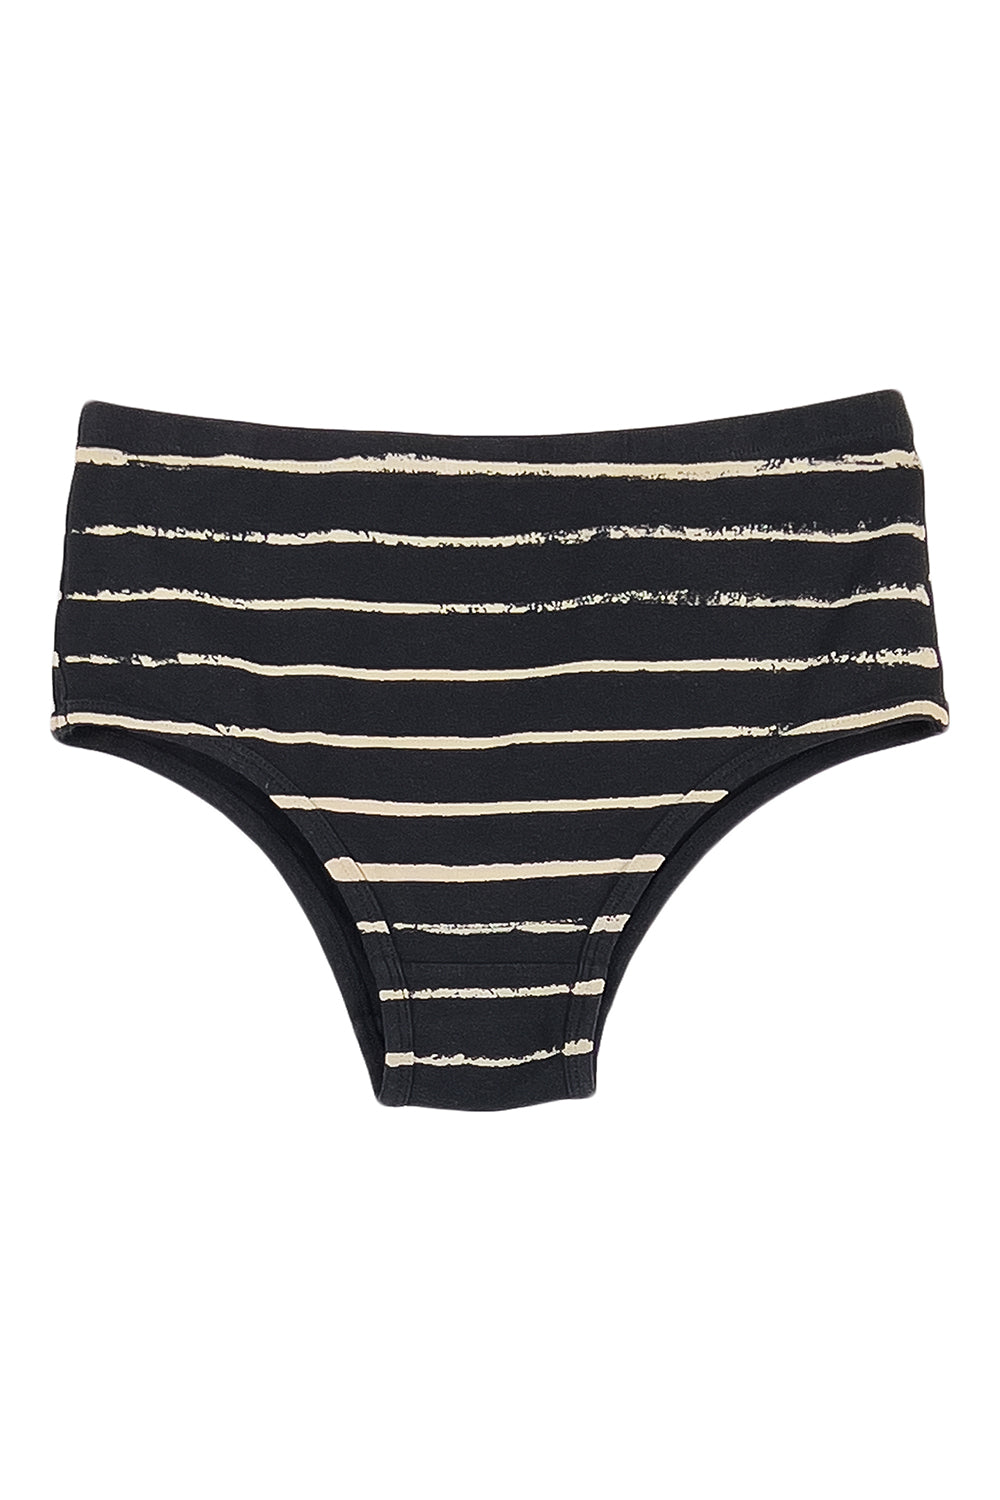 Best Fitting Panty Womens Cotton Stretch Briefs, Ethiopia